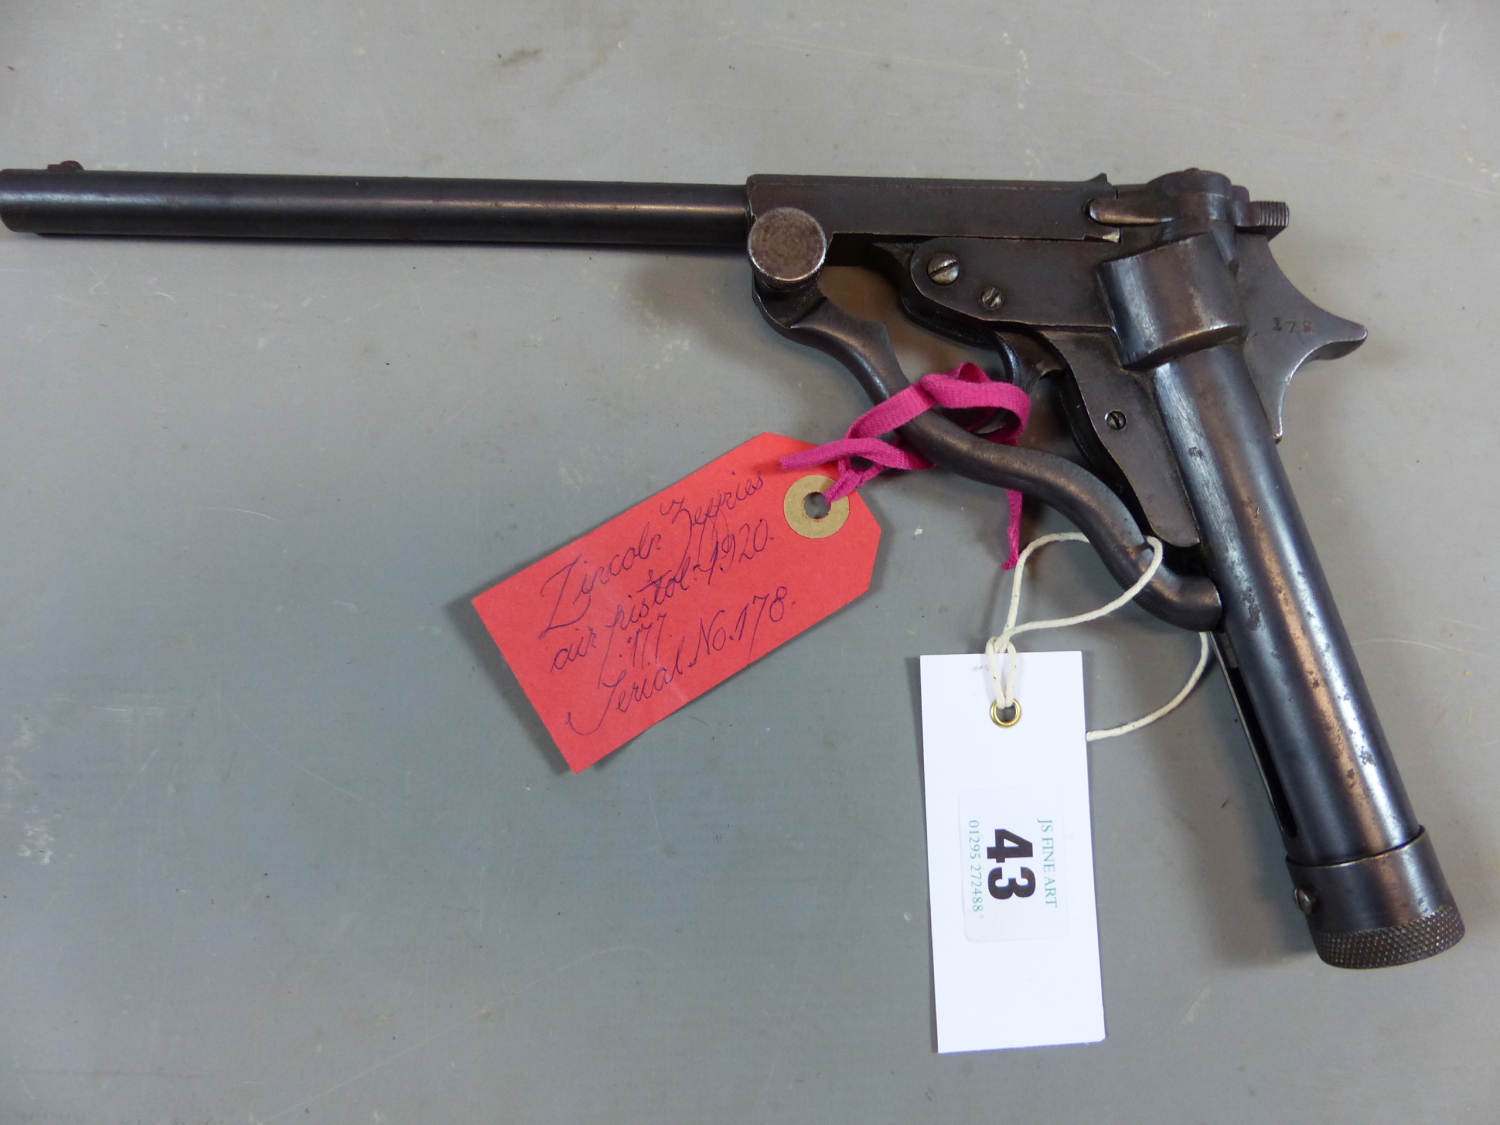 AIR PISTOL. A LINCOLN JEFFERIES .177 "LINCOLN" AIRPISTOL SERIAL NUMBER 178 ( NO CERTIFICATE